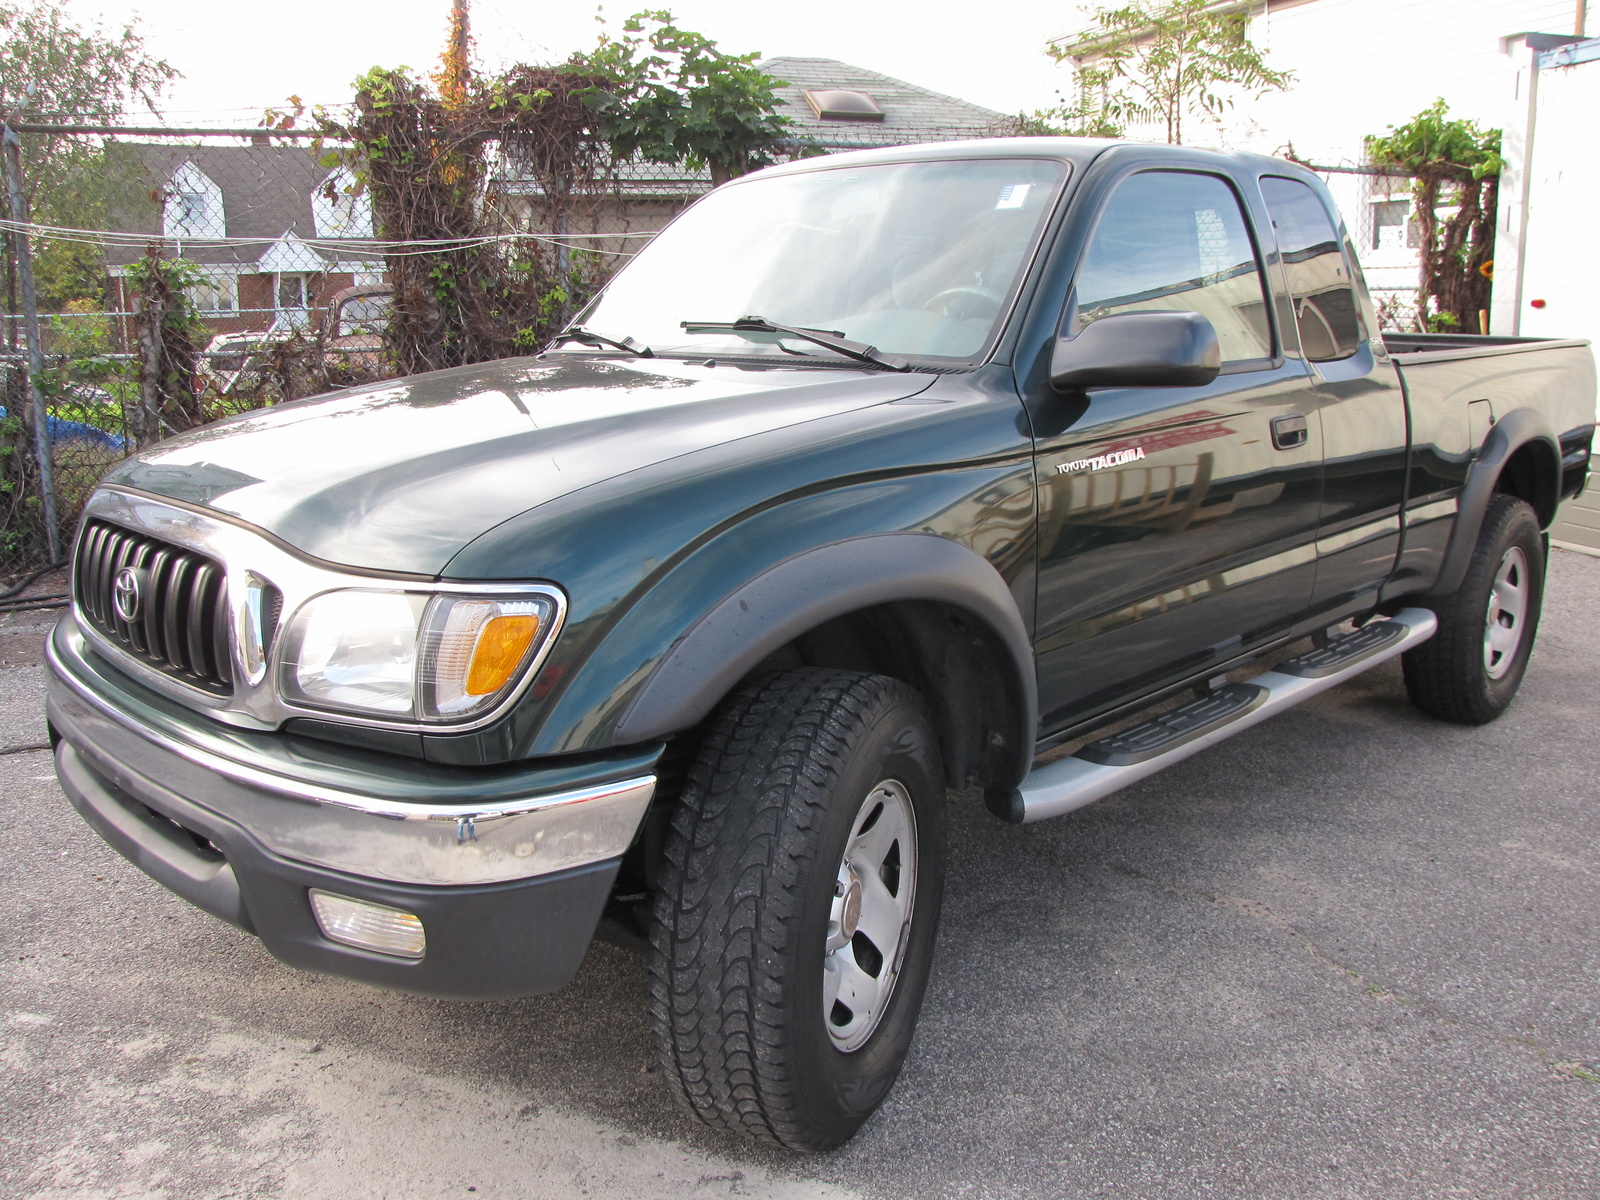 2003 toyota tacoma 4wd review #6